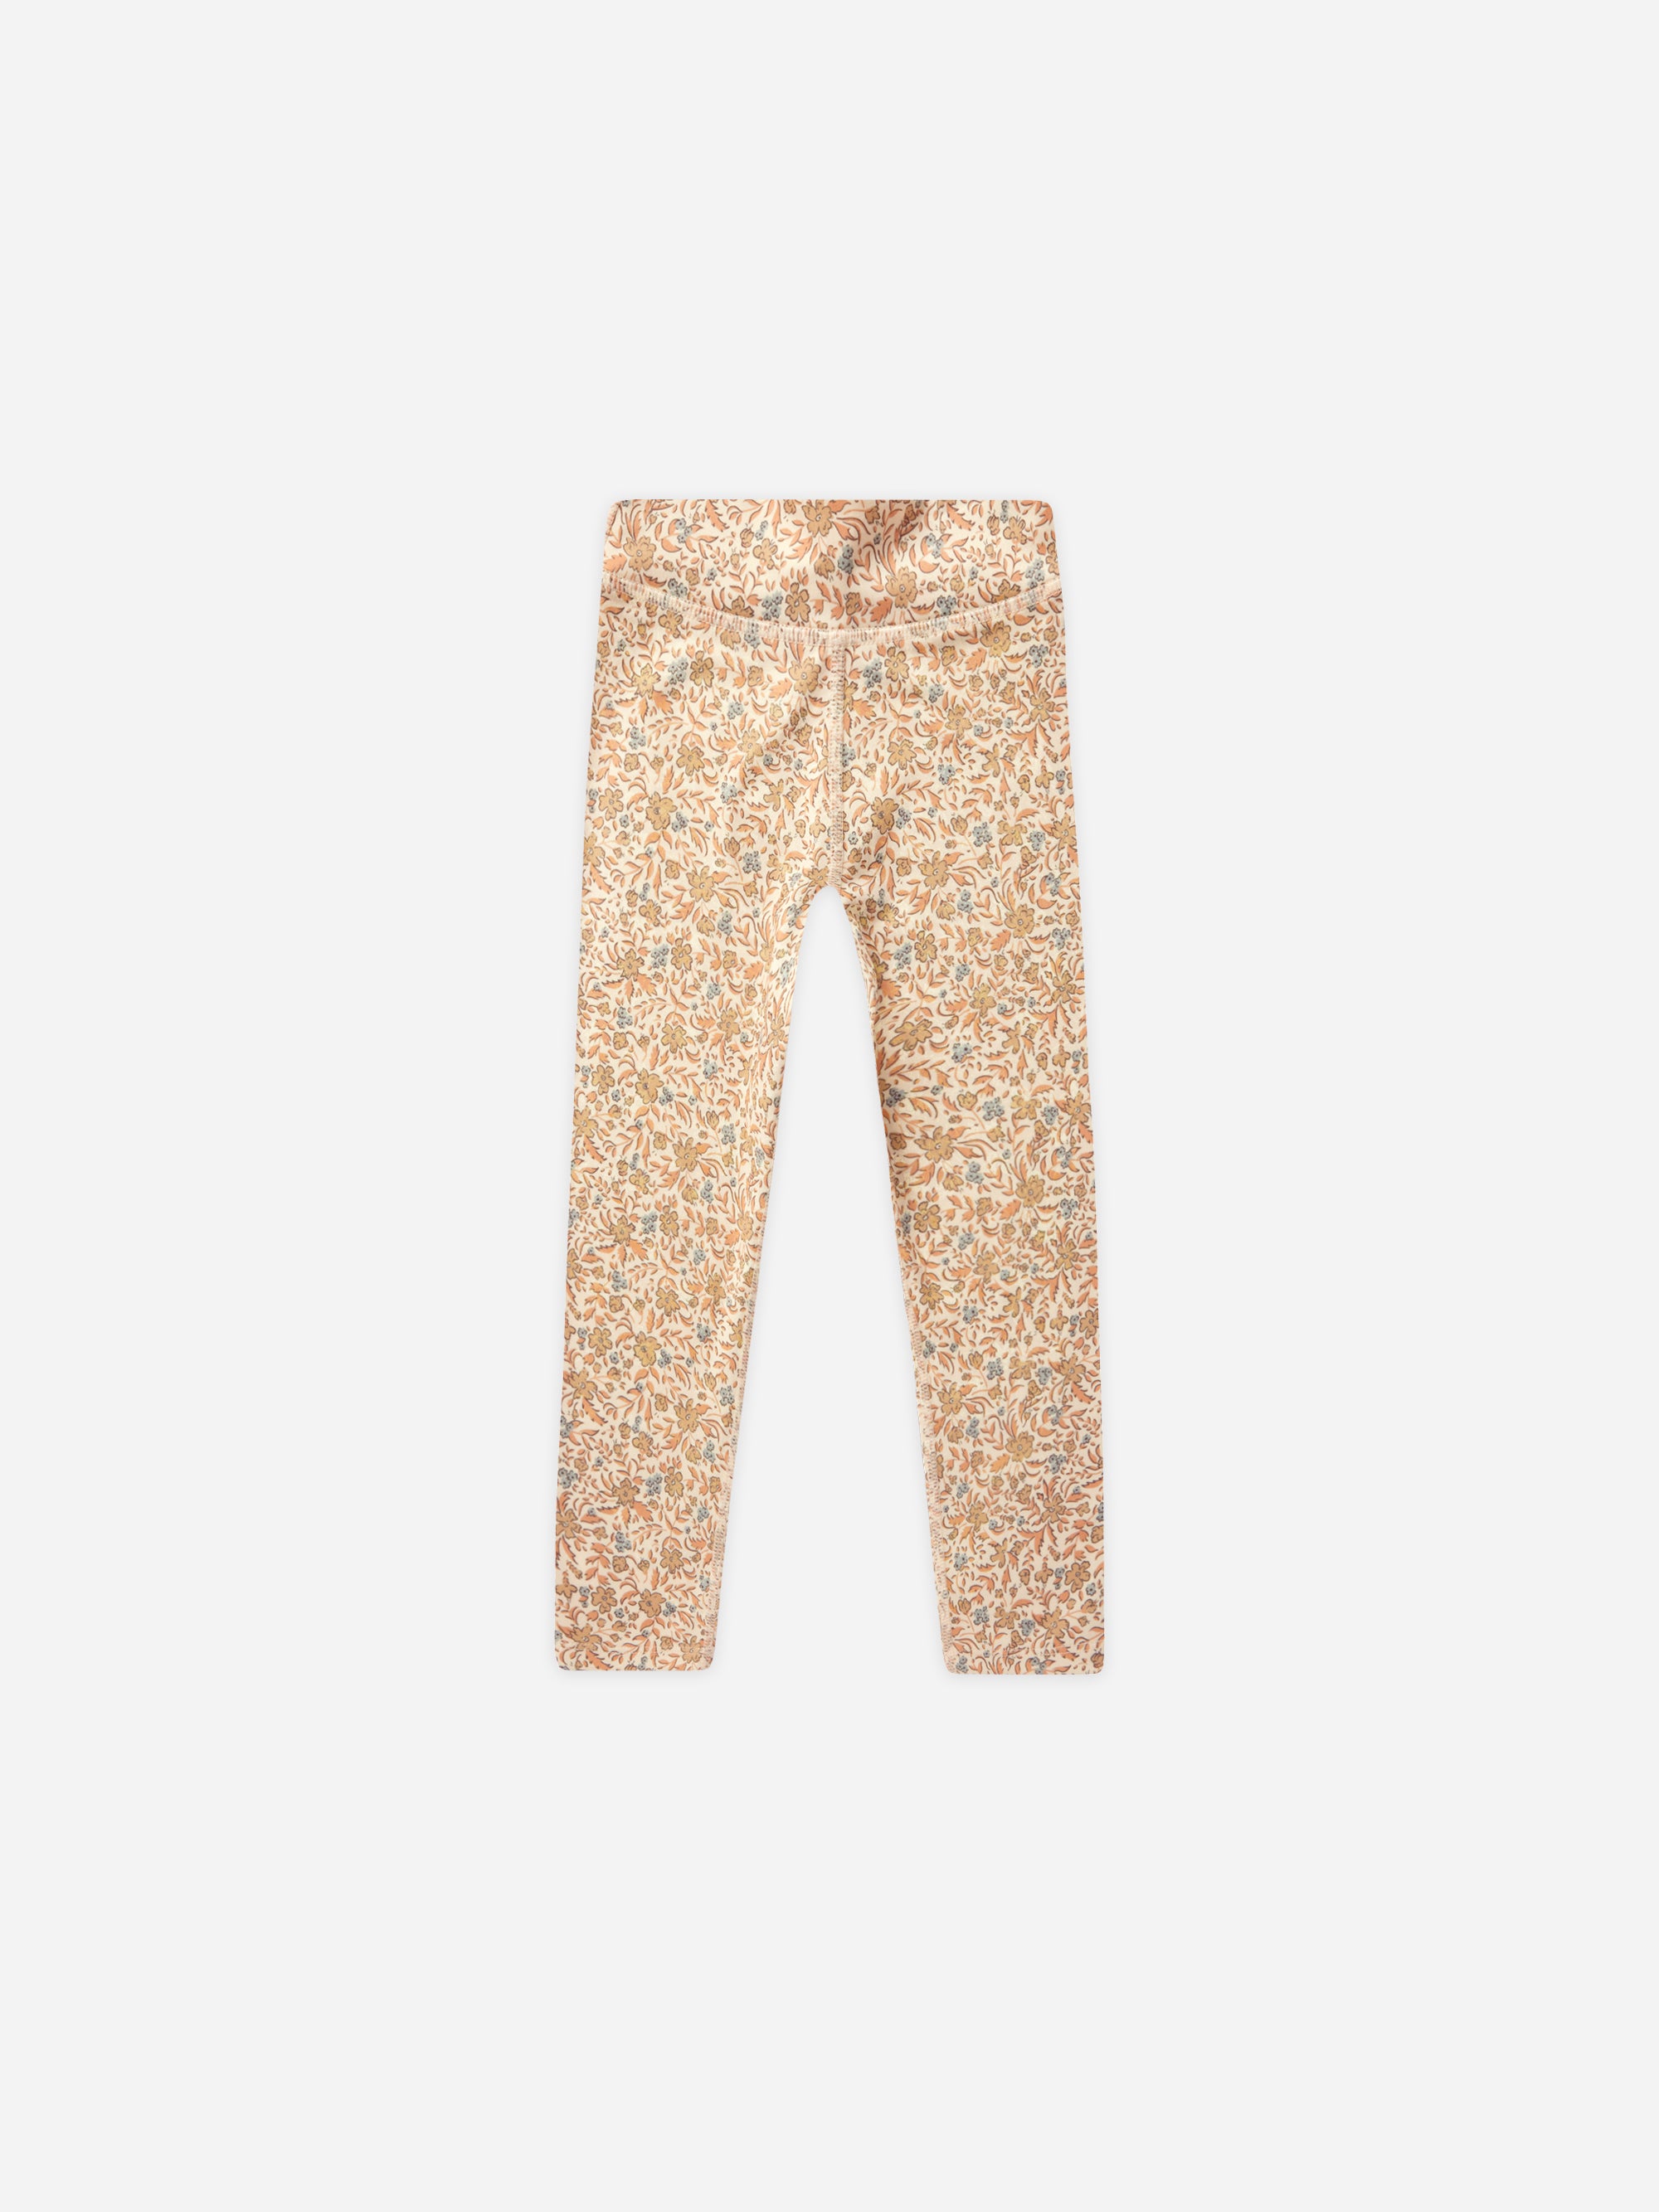 Basic Legging || Blossom - Rylee + Cru | Kids Clothes | Trendy Baby Clothes | Modern Infant Outfits |